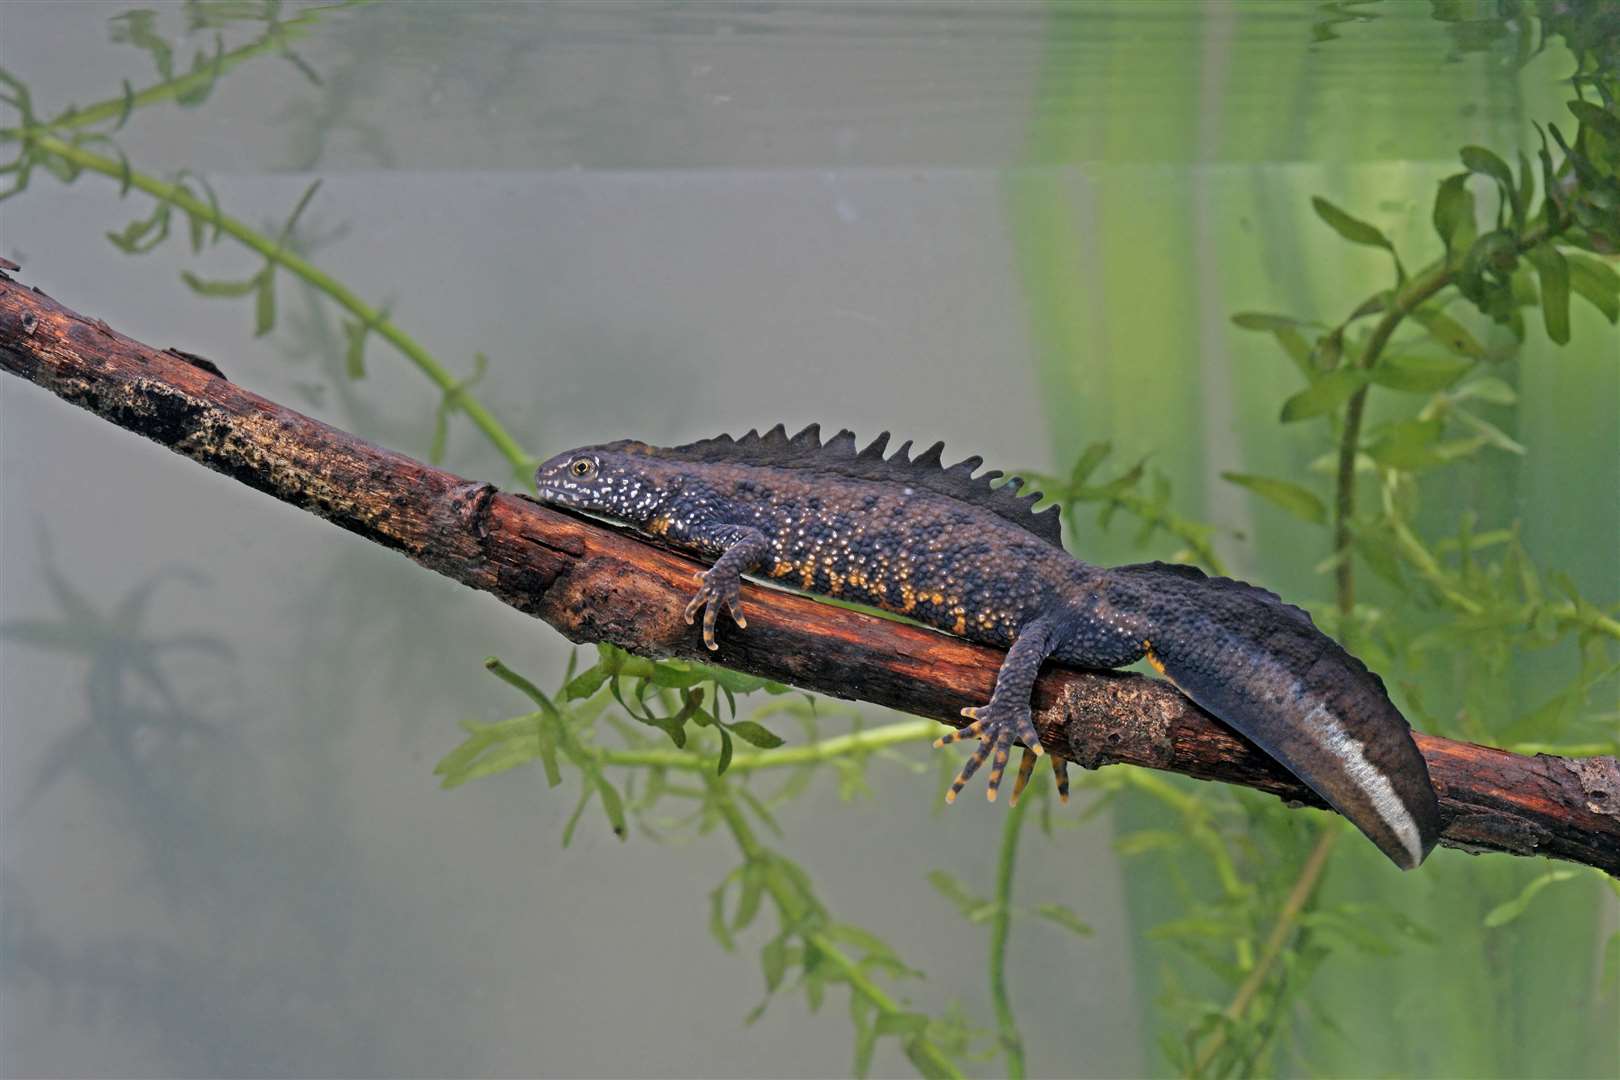 Great Crested Newts breed in ponds